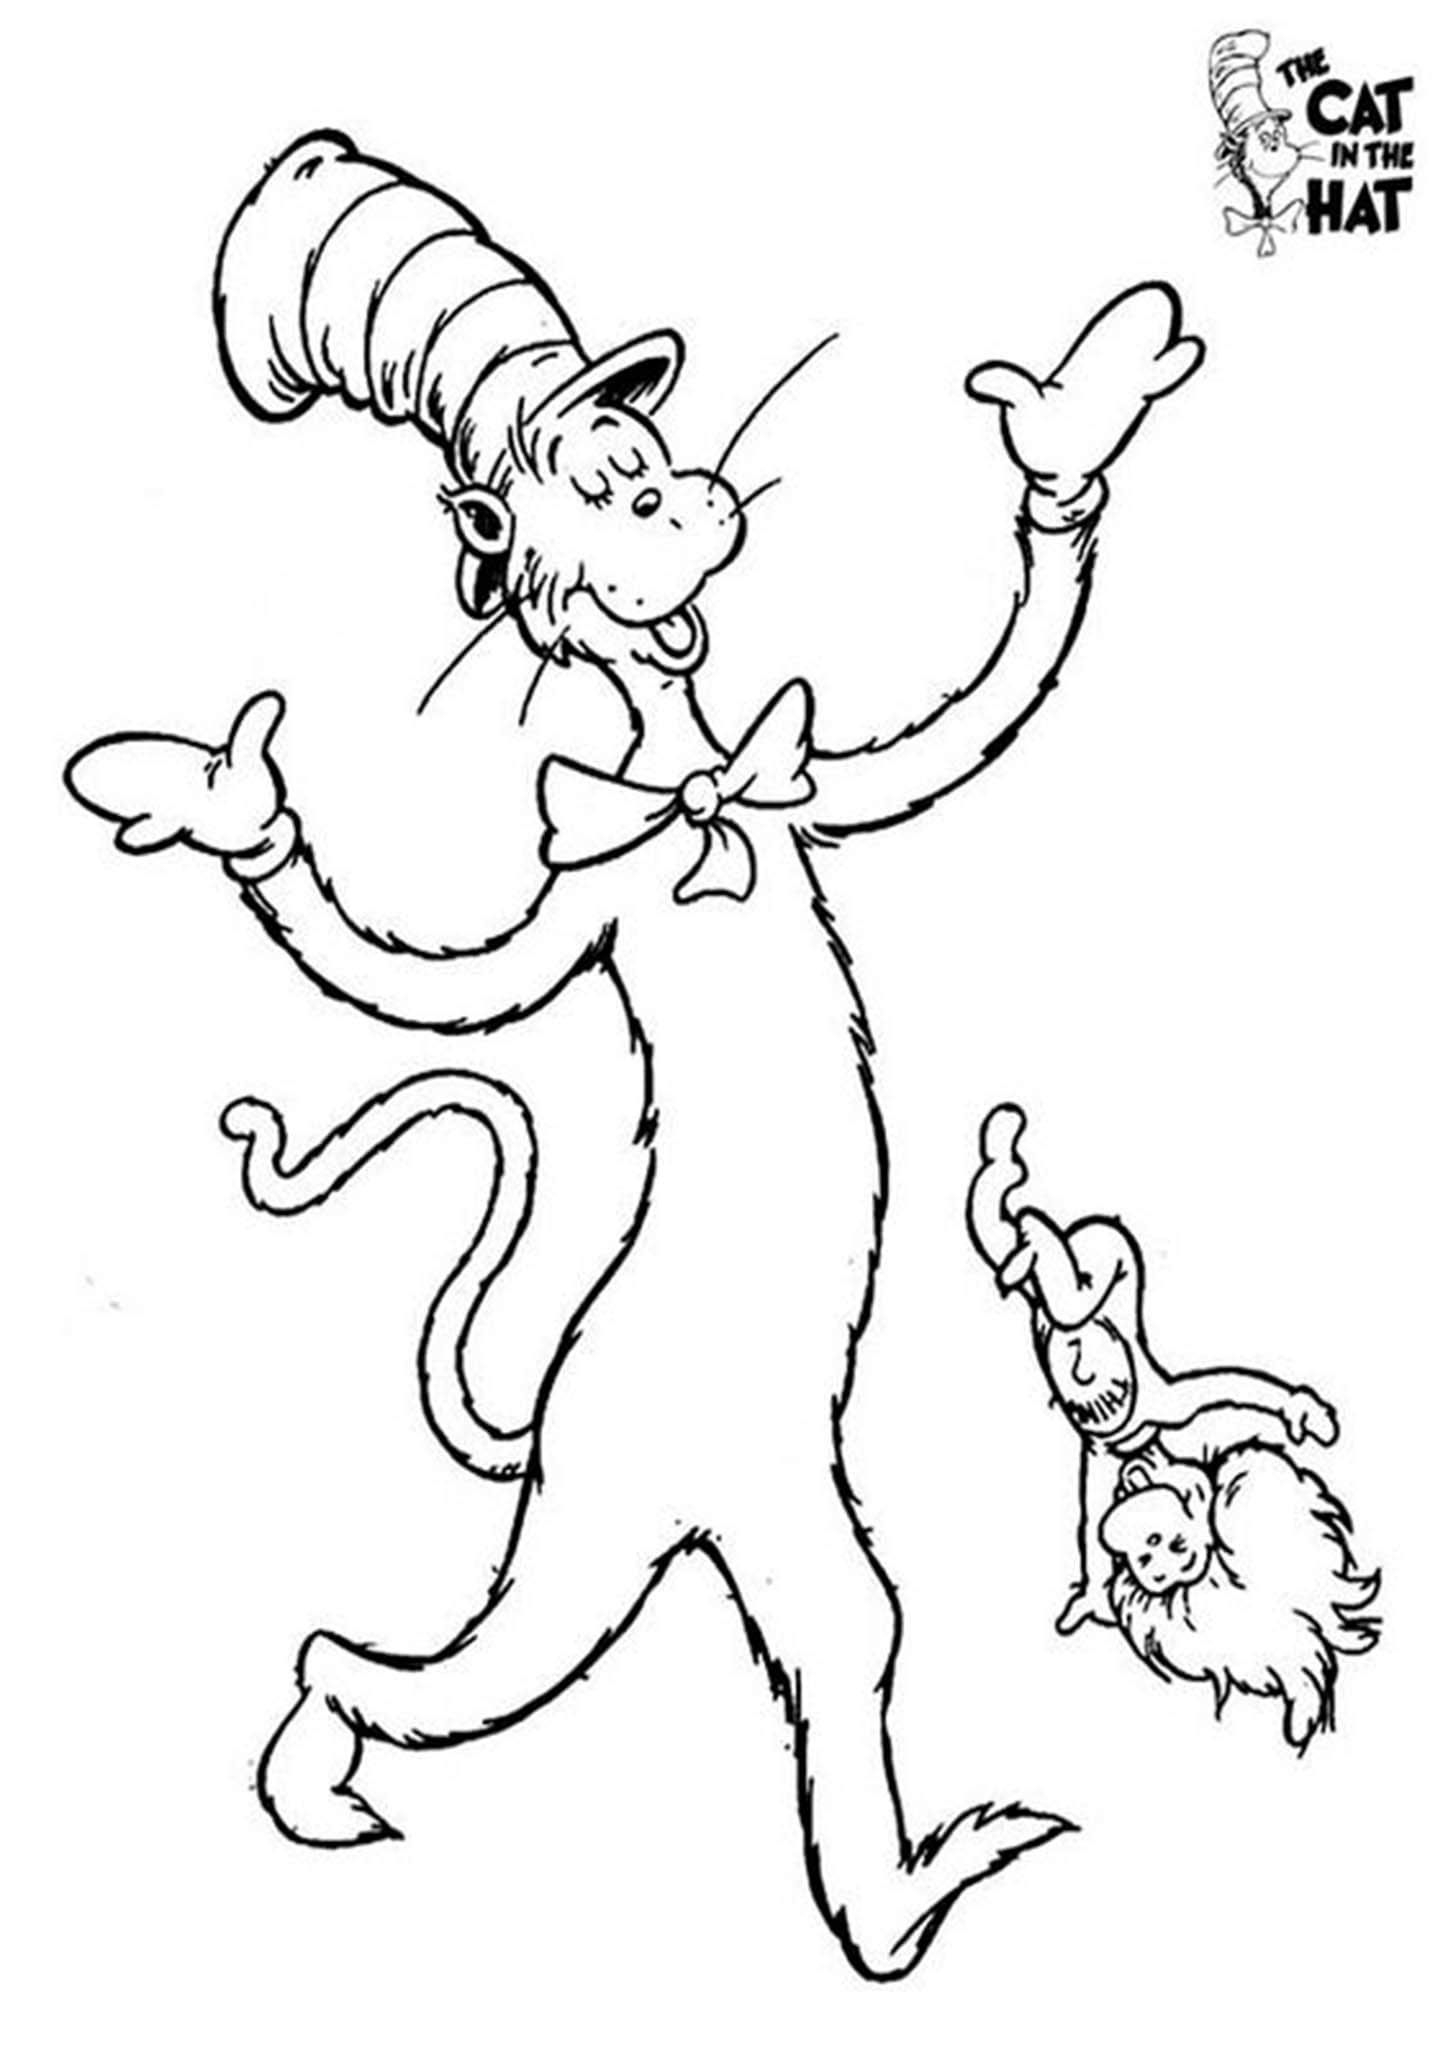 Free Easy To Print Cat In The Hat Coloring Pages Dr Seuss Coloring Pages Dr Seuss Coloring Sheet Cartoon Coloring Pages - Free Printable Cat In The Hat Pictures